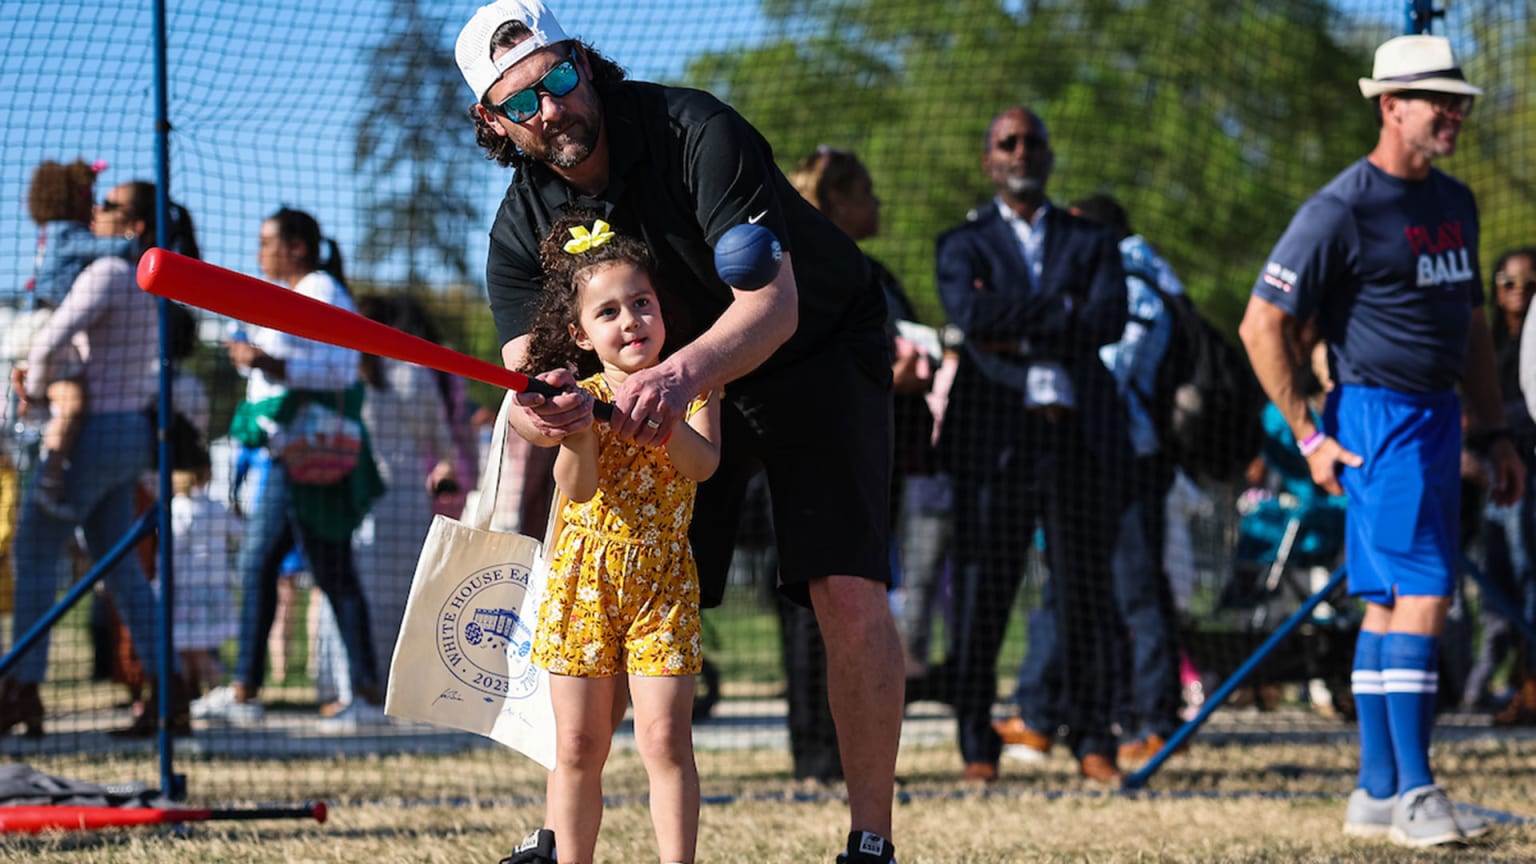 A father helps his daughter swing a bat